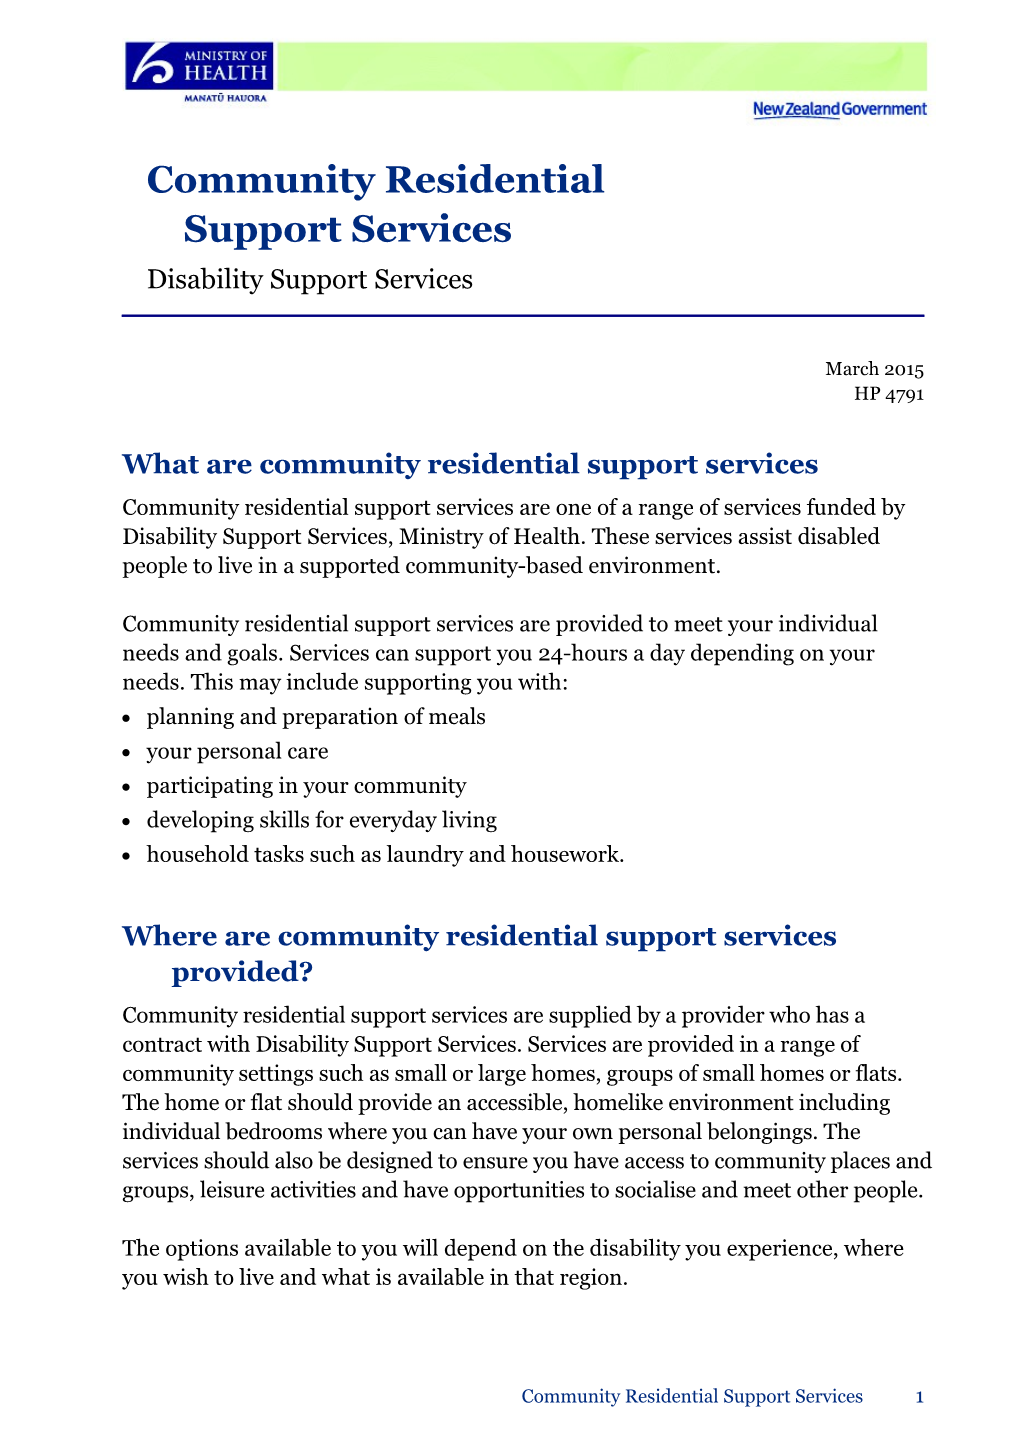 Community Residential Support Services